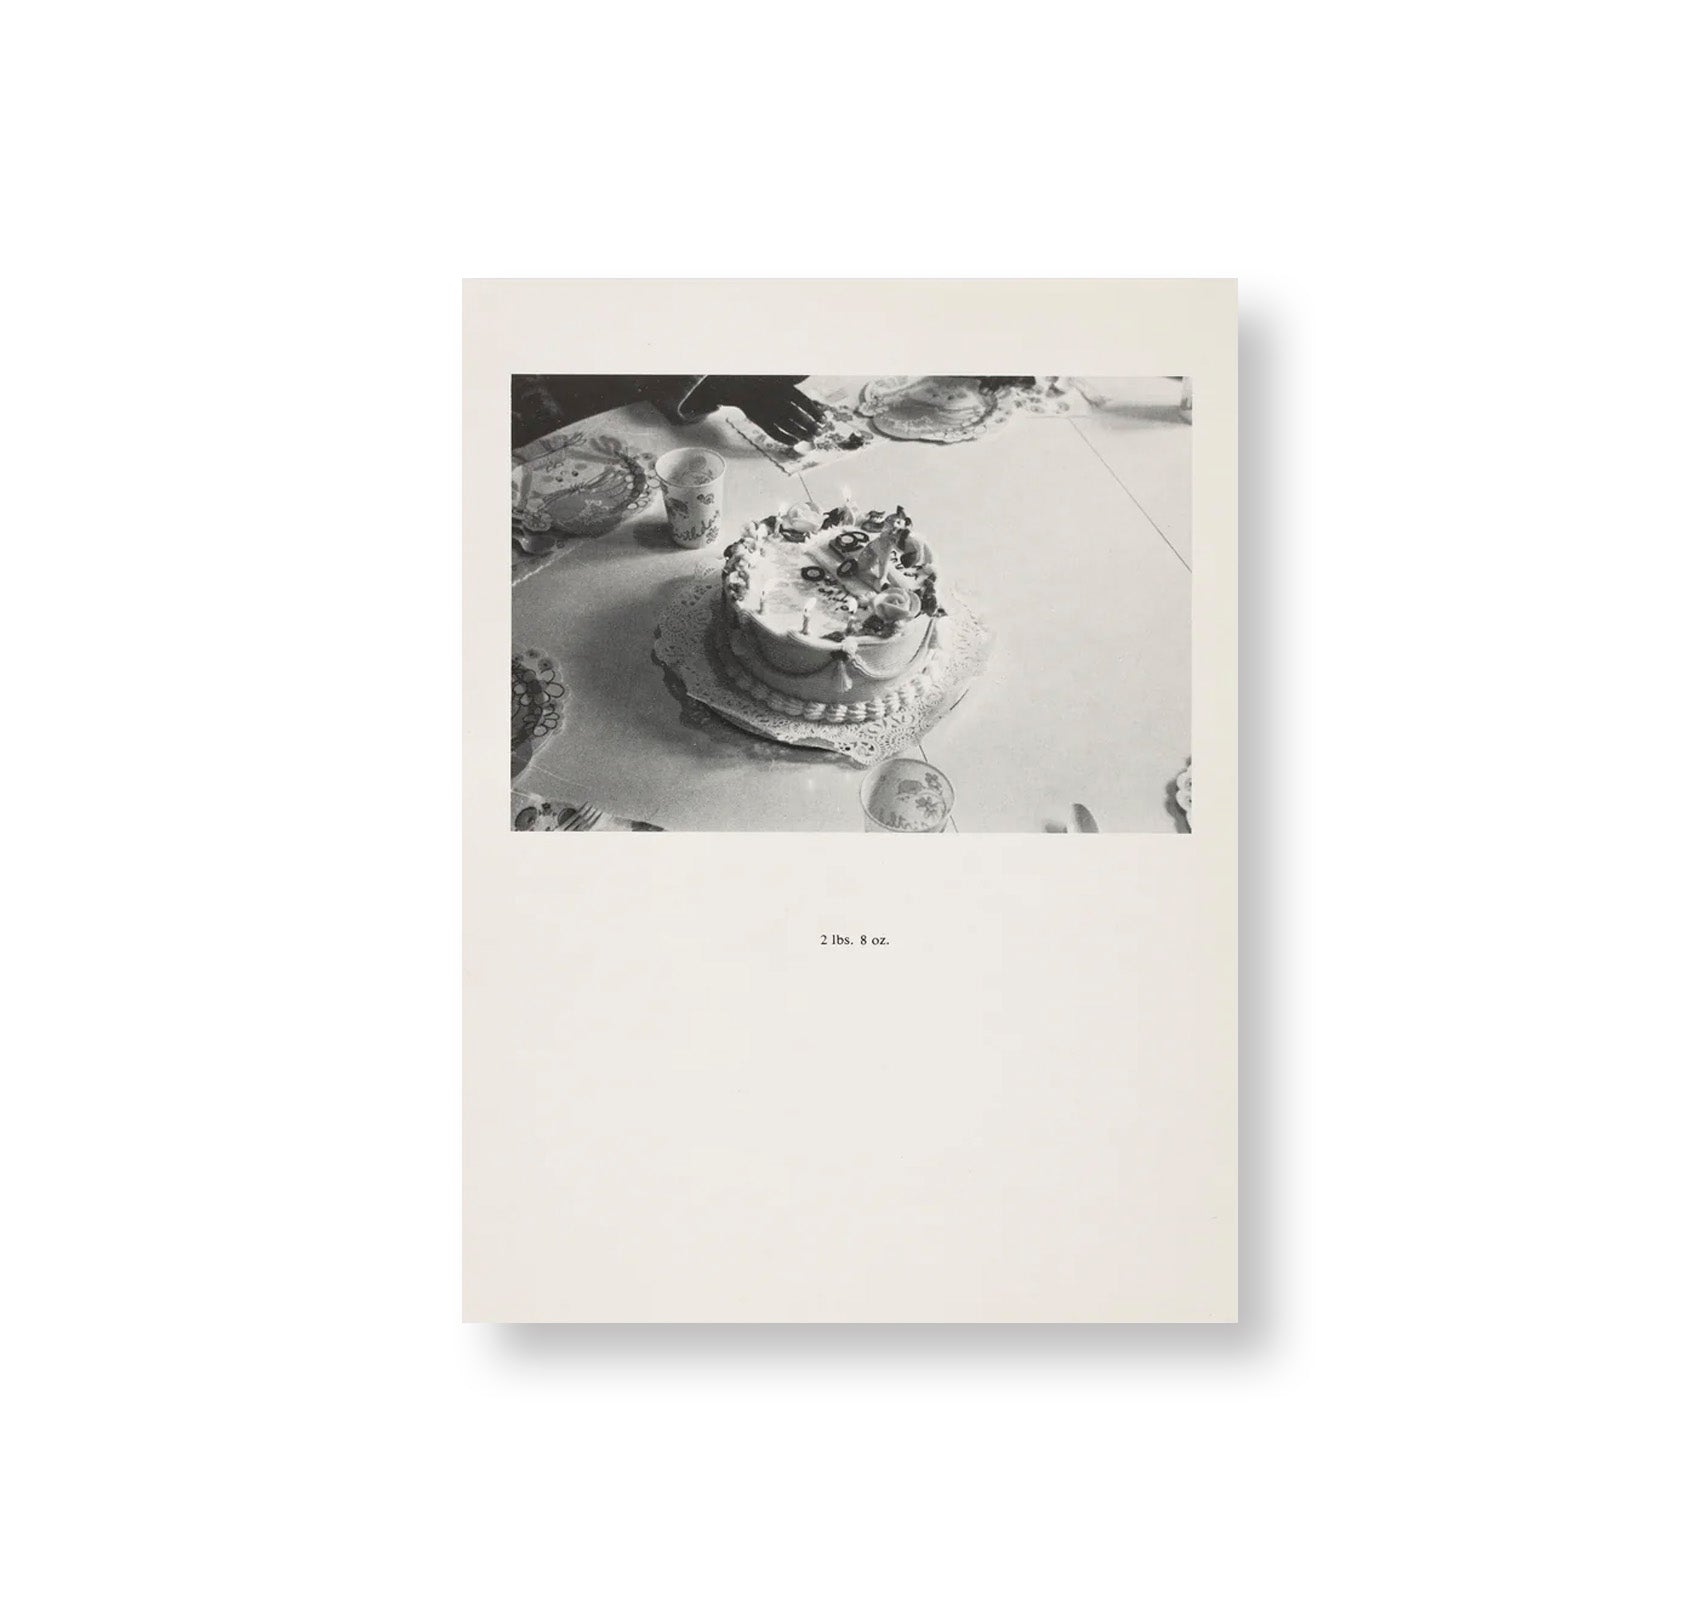 BABYCAKES WITH WEIGHTS, 1970 by Ed Ruscha